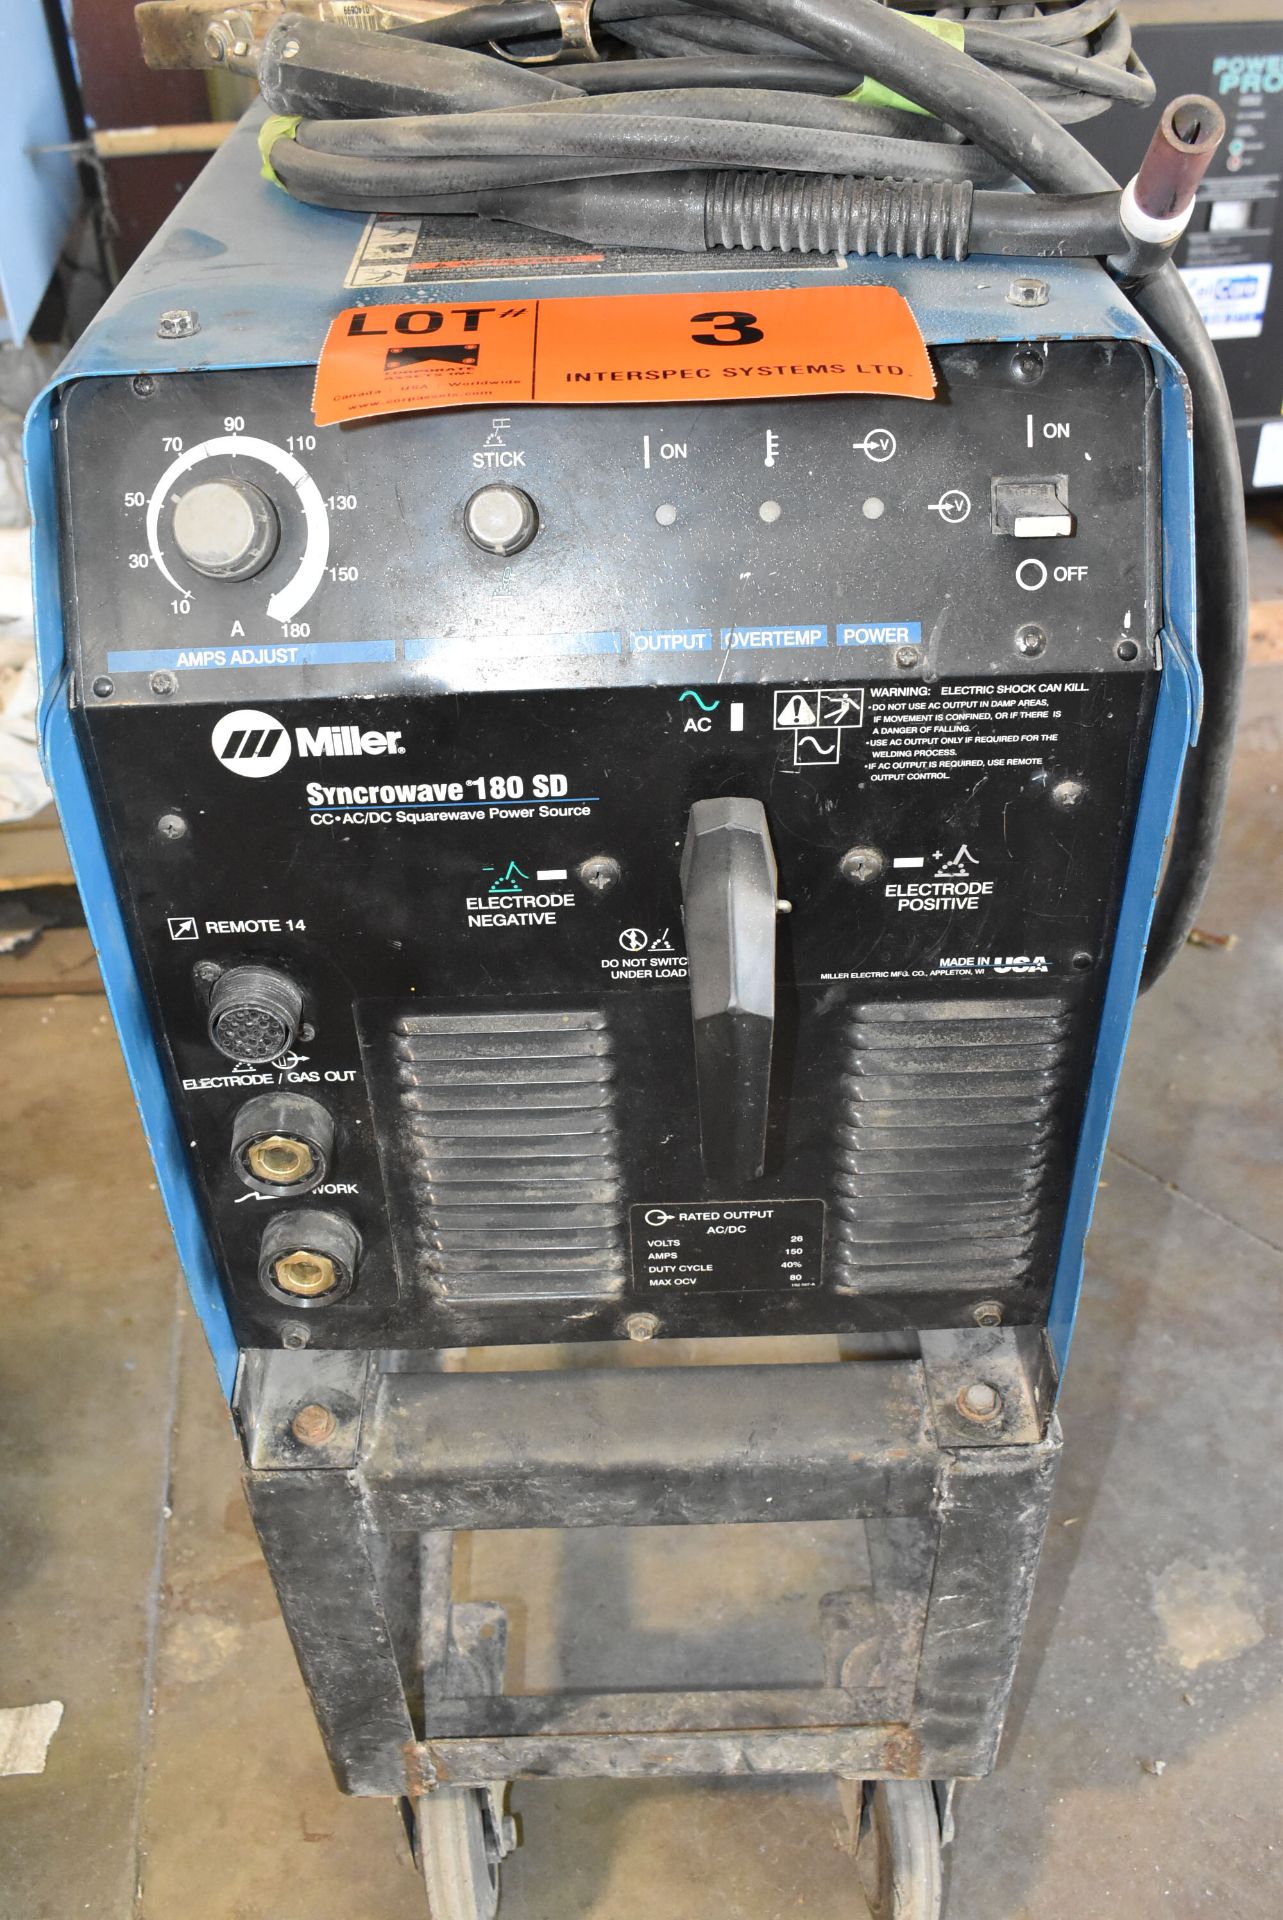 MILLER SYNCROWAVE180 DS TIG WELDER WITH CABLES AND GUN, S/N LA197136 [RIGGING FOR FOR LOT #3 - $25 - Image 3 of 5